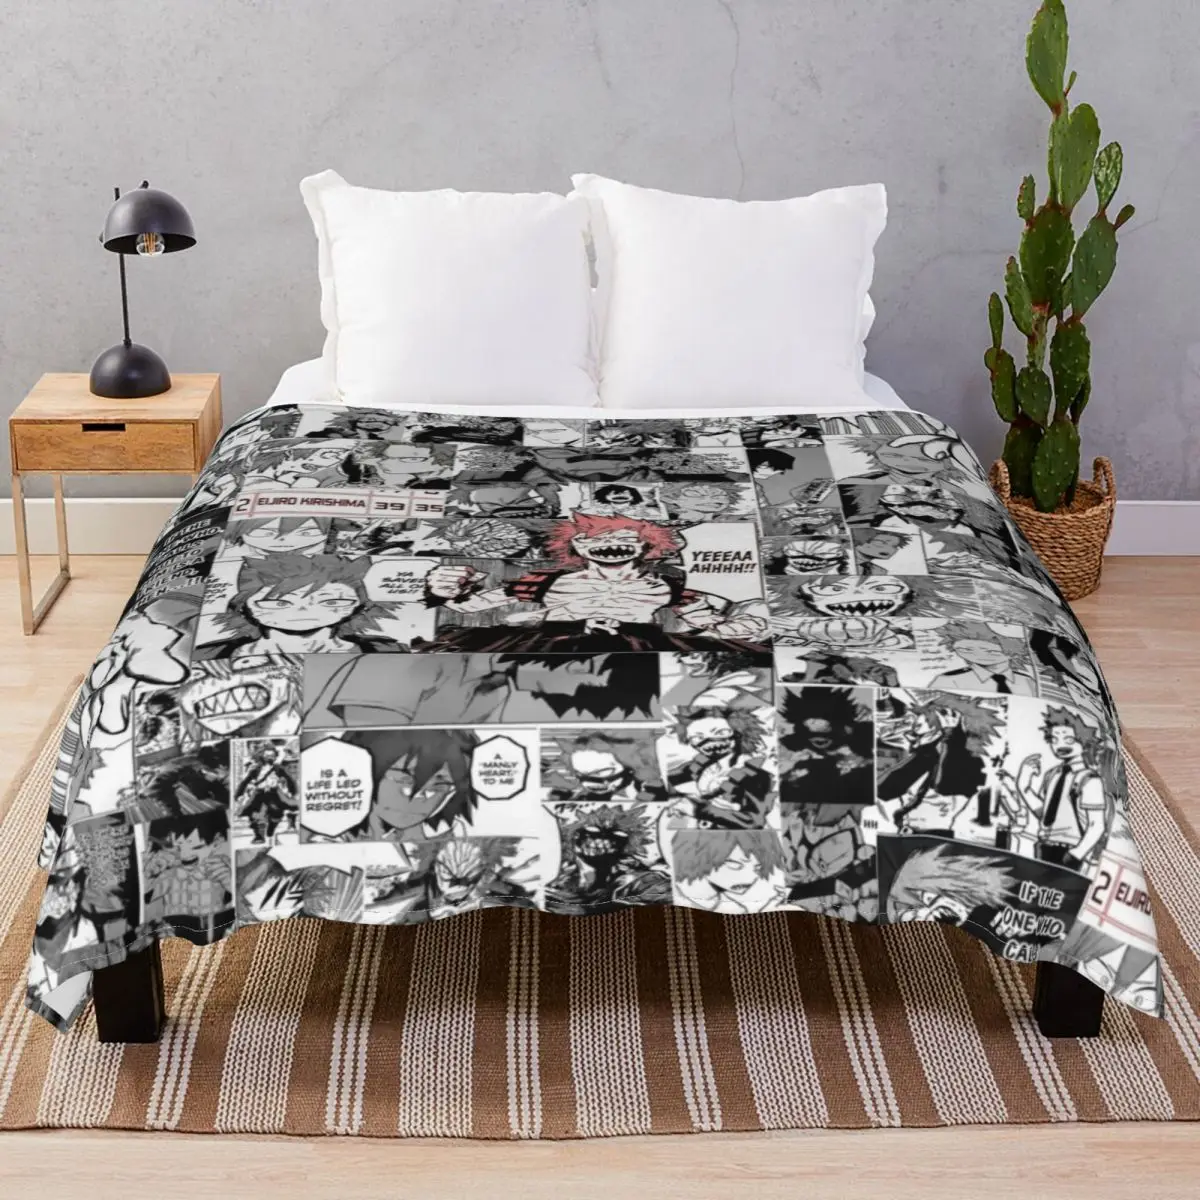 Red Riot Manly-hearted Hero Blanket Flannel Plush Print Super Soft Throw Blankets for Bed Sofa Travel Cinema